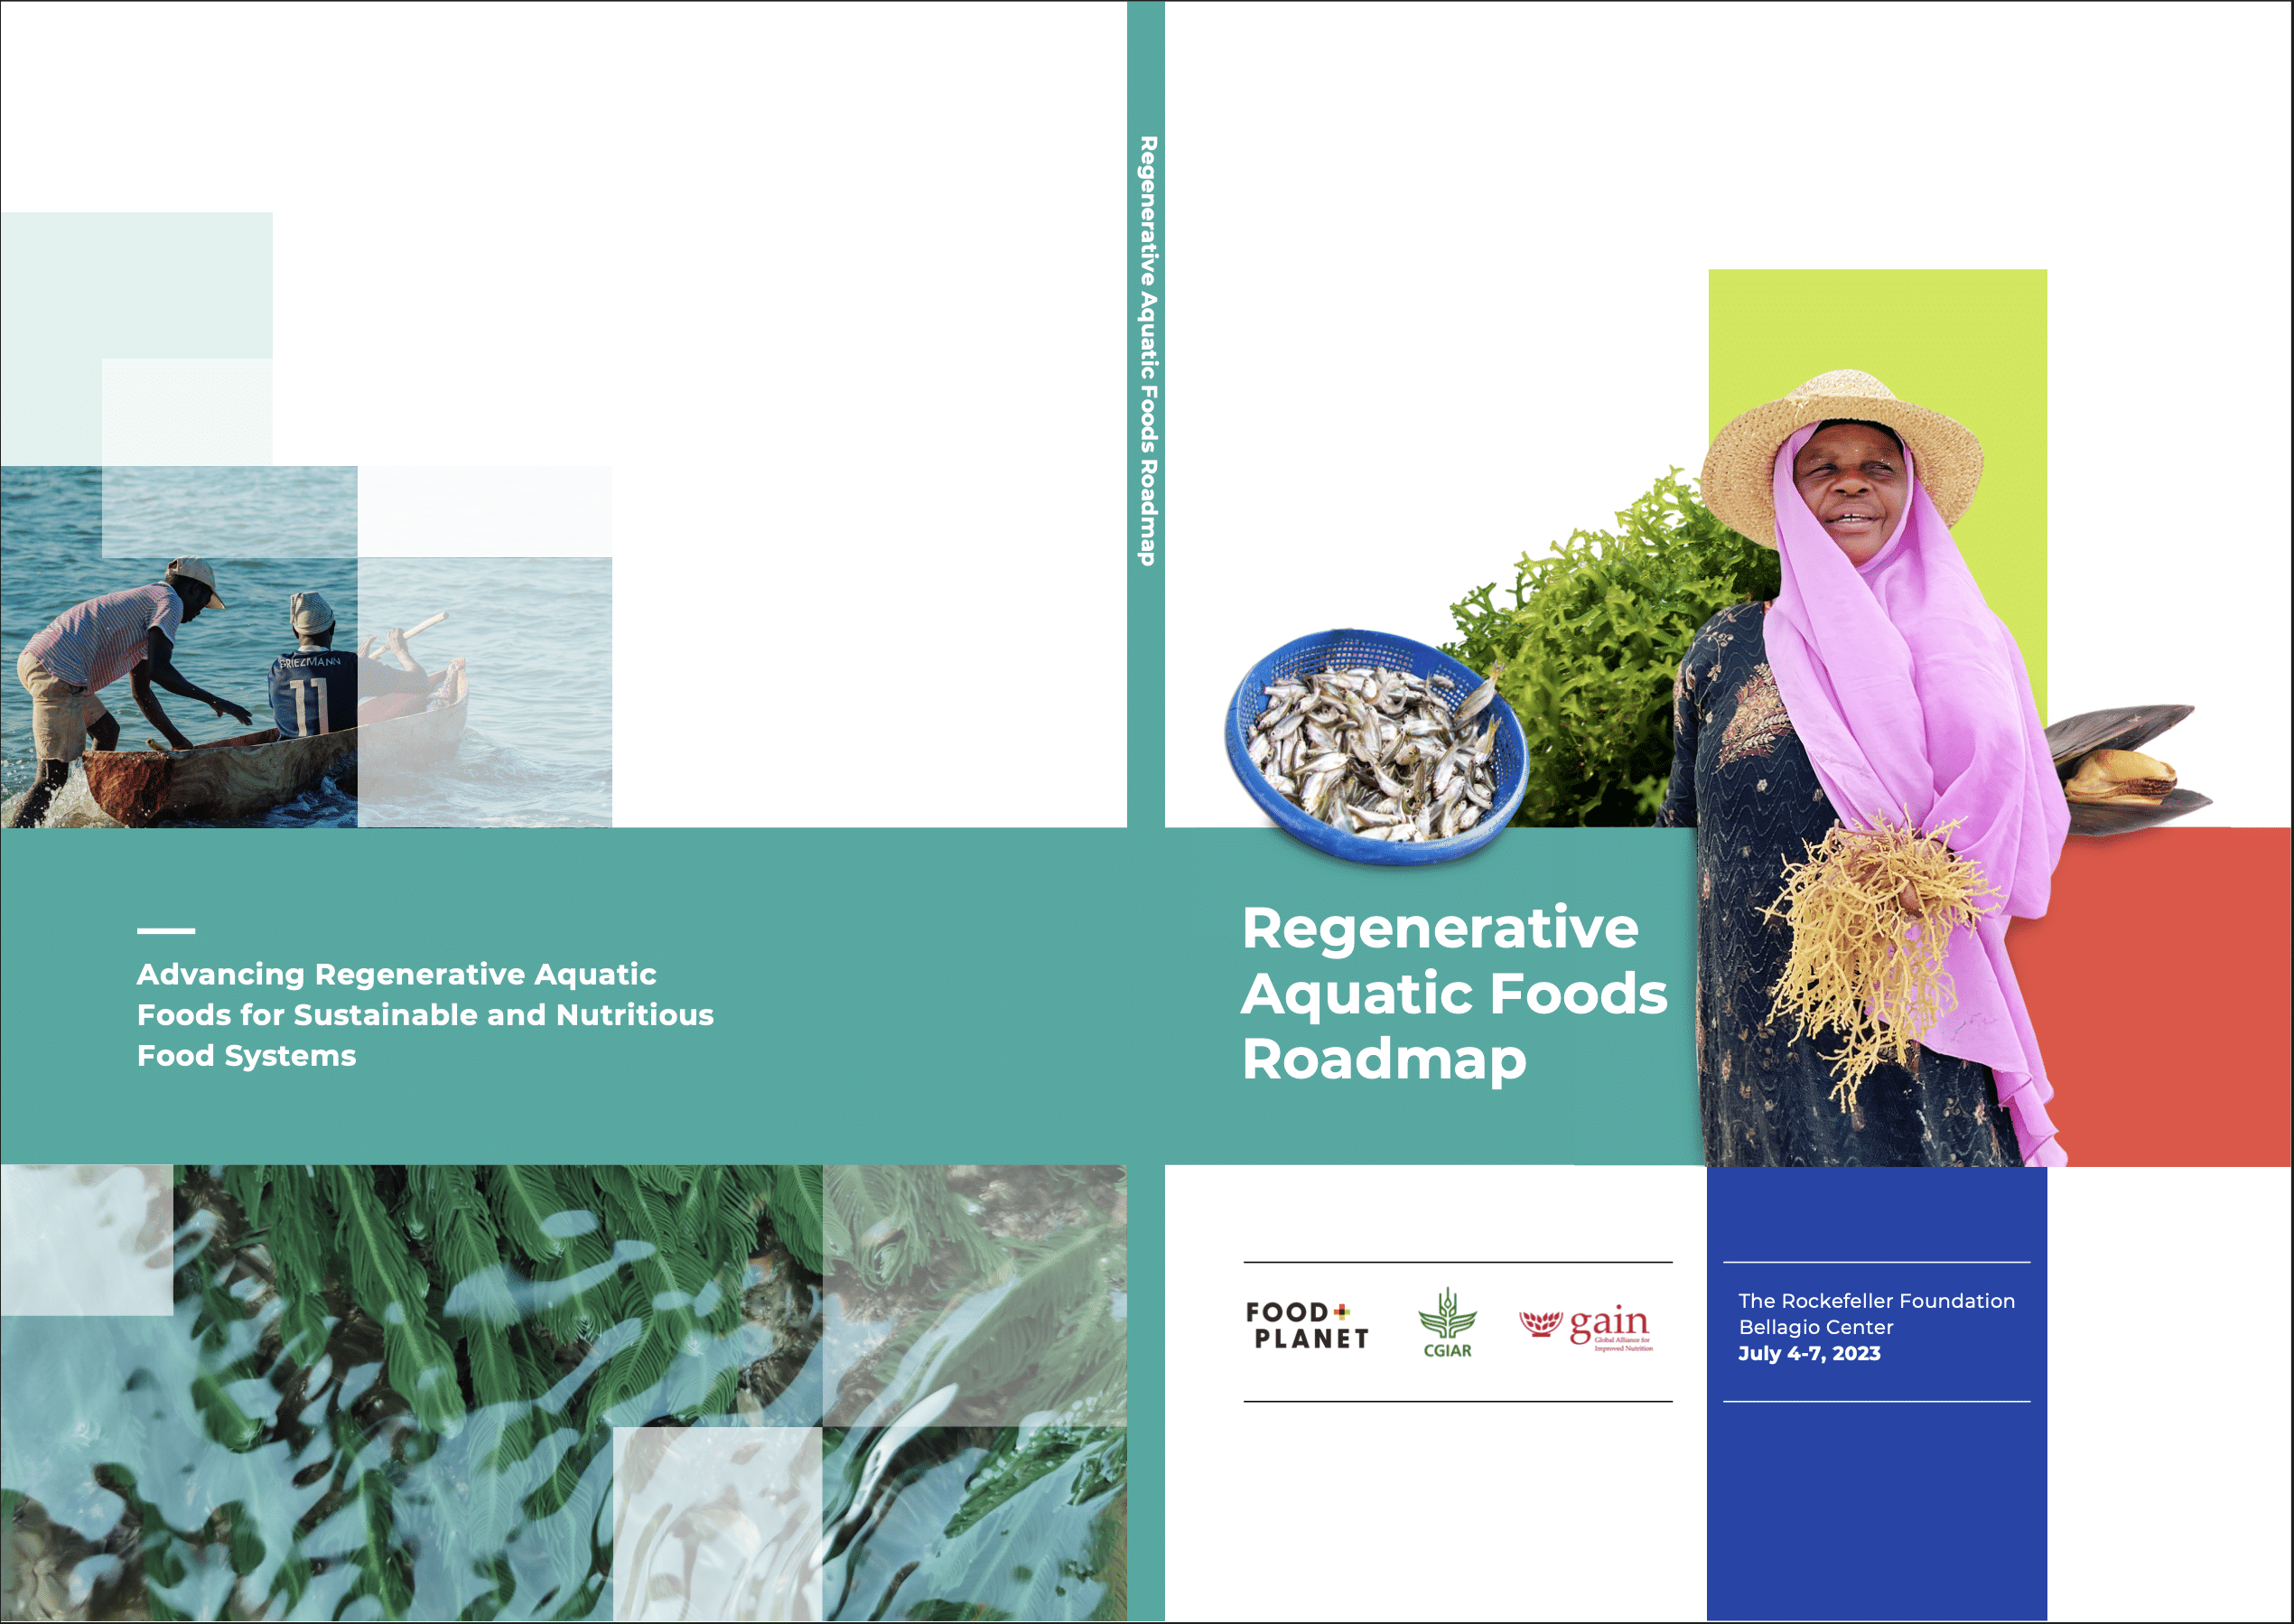 Global Collaboration Leads the Way for Advancing Regenerative Aquatic Foods

Roadmap Release: Regenerative Aquatic Foods: A Roadmap to Action (Link). 
Host Organizations: Food + Planet; GAIN; CGIAR; with convening support from The Rockefeller Foundation's Bellagio Center
Date: 1 Feb 2024